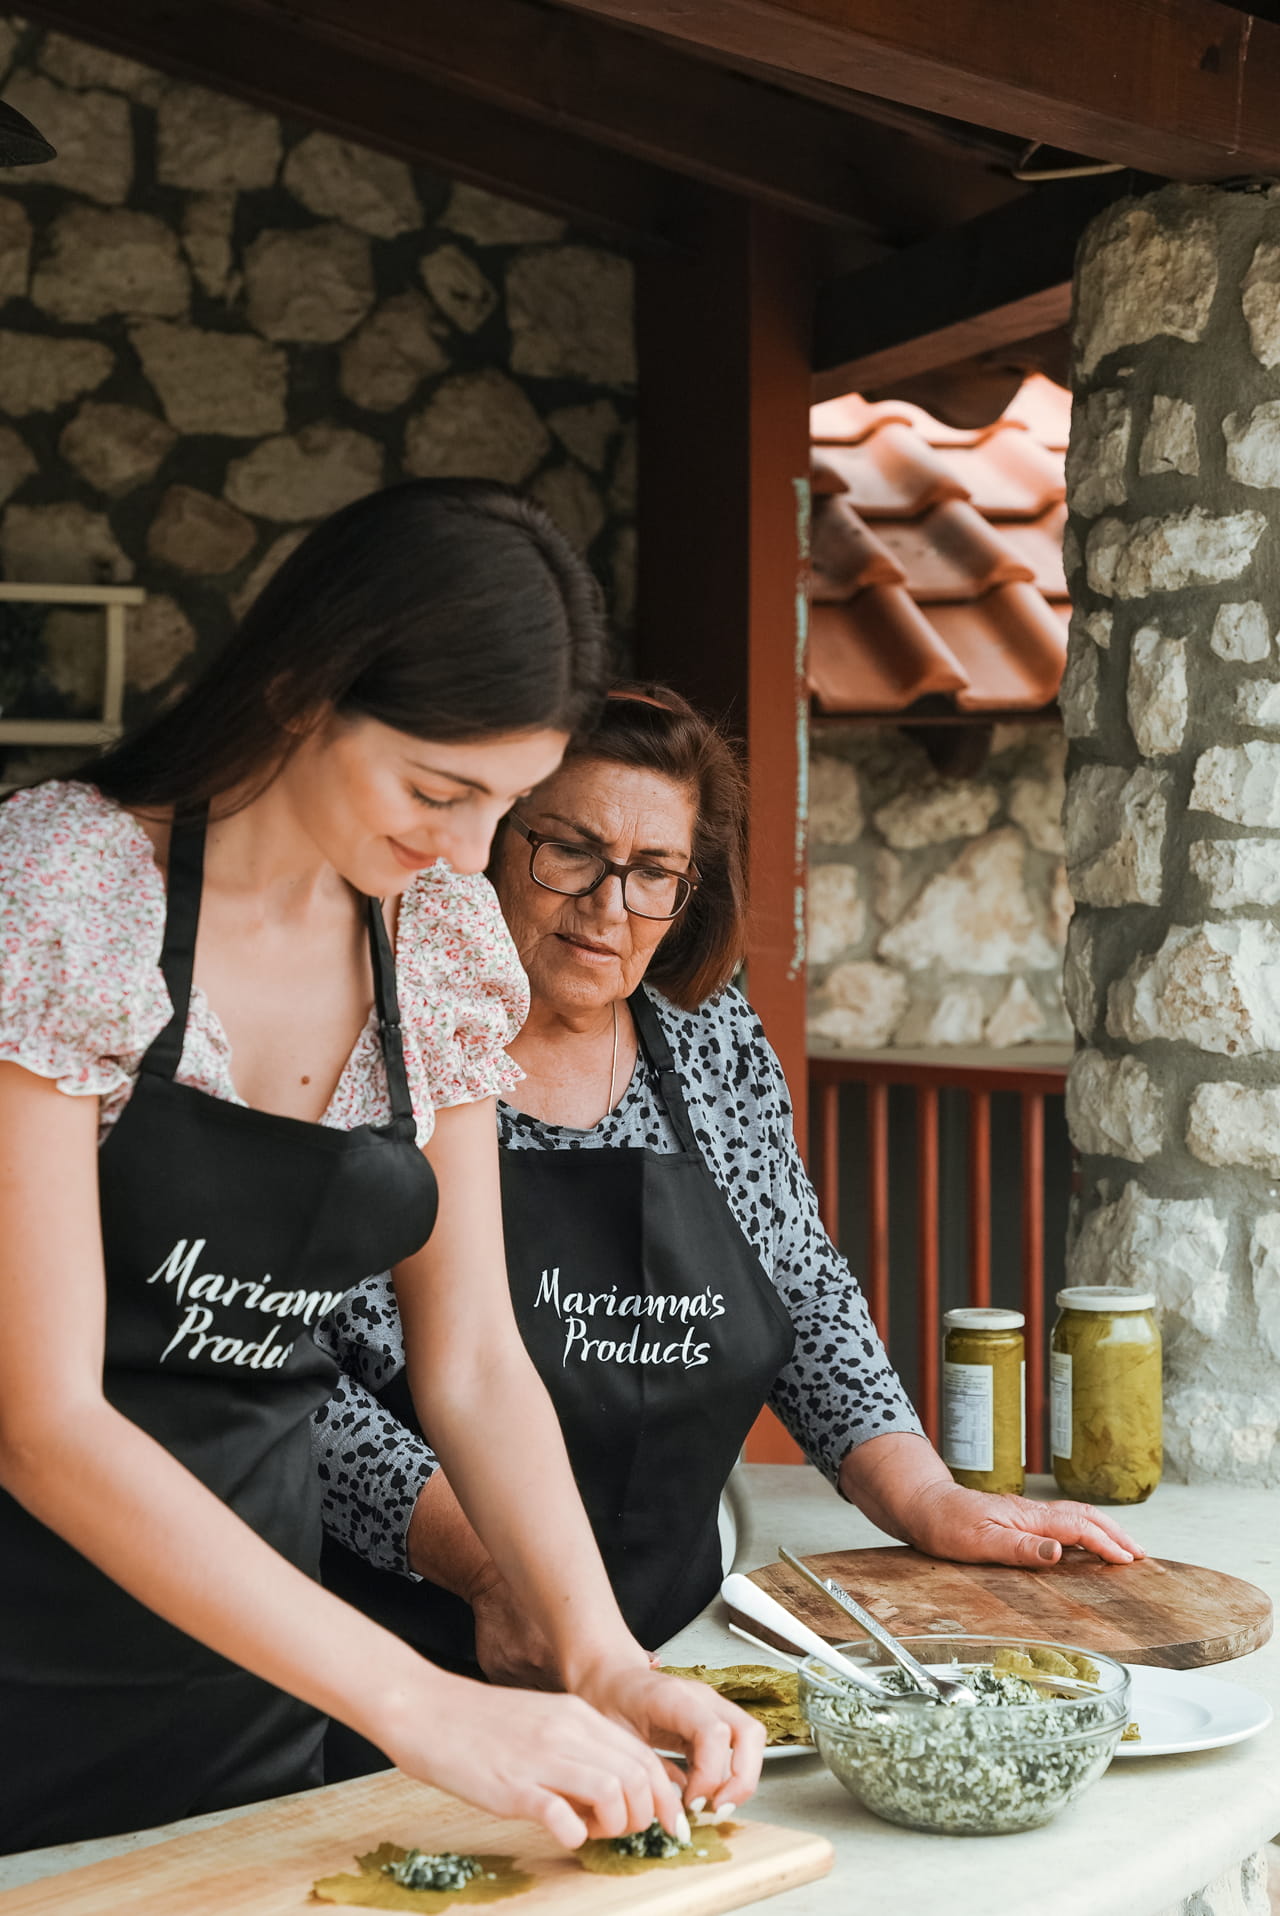 A dolmades (stuffed vine leaves) cookery lesson in Halkidiki